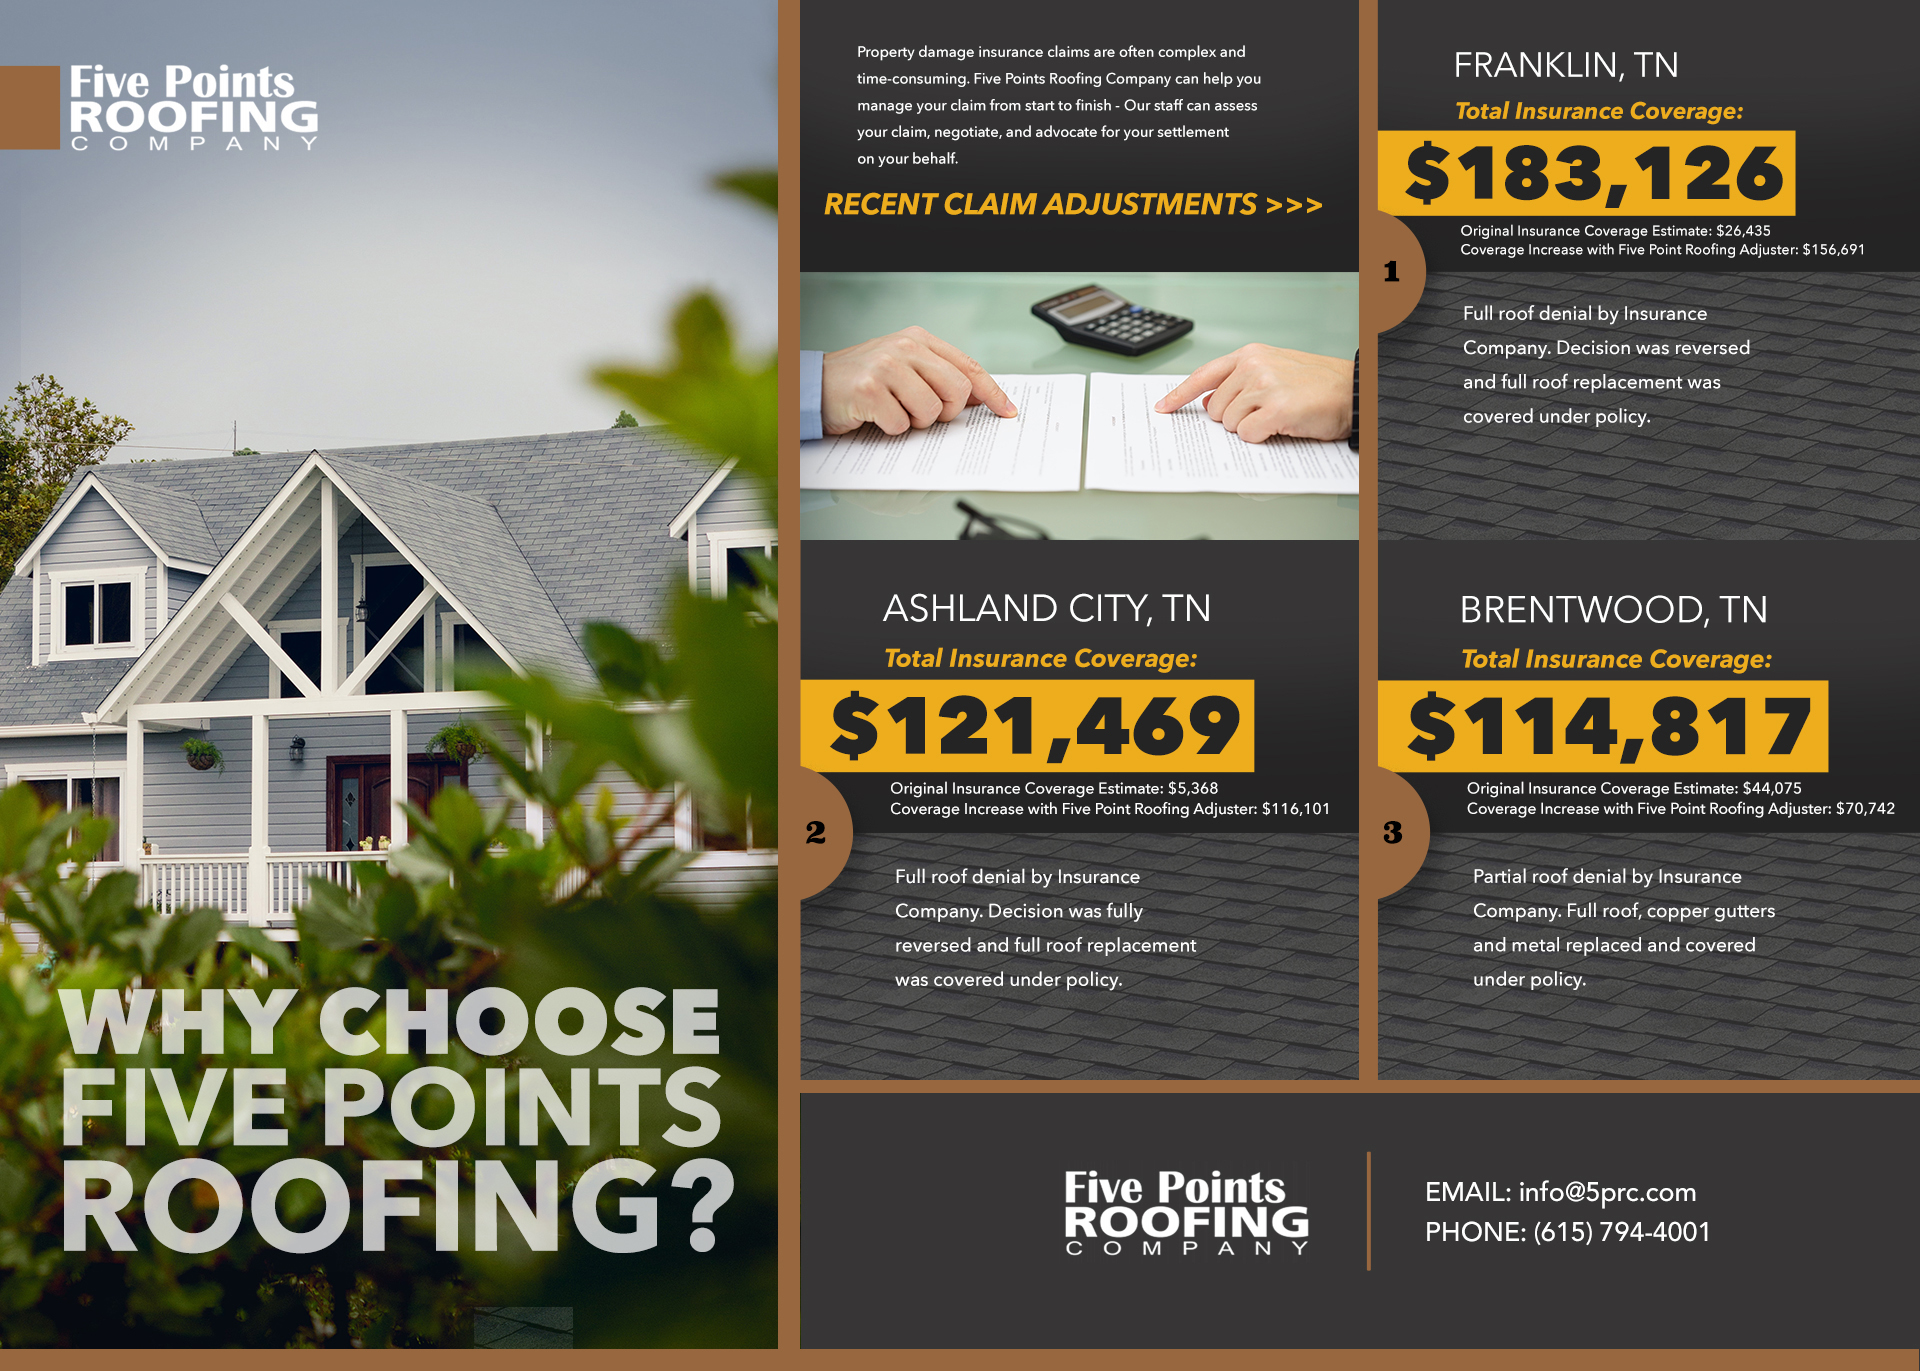 Insurance Claim Adjustments from Five Points Roofing in Middle Tennessee